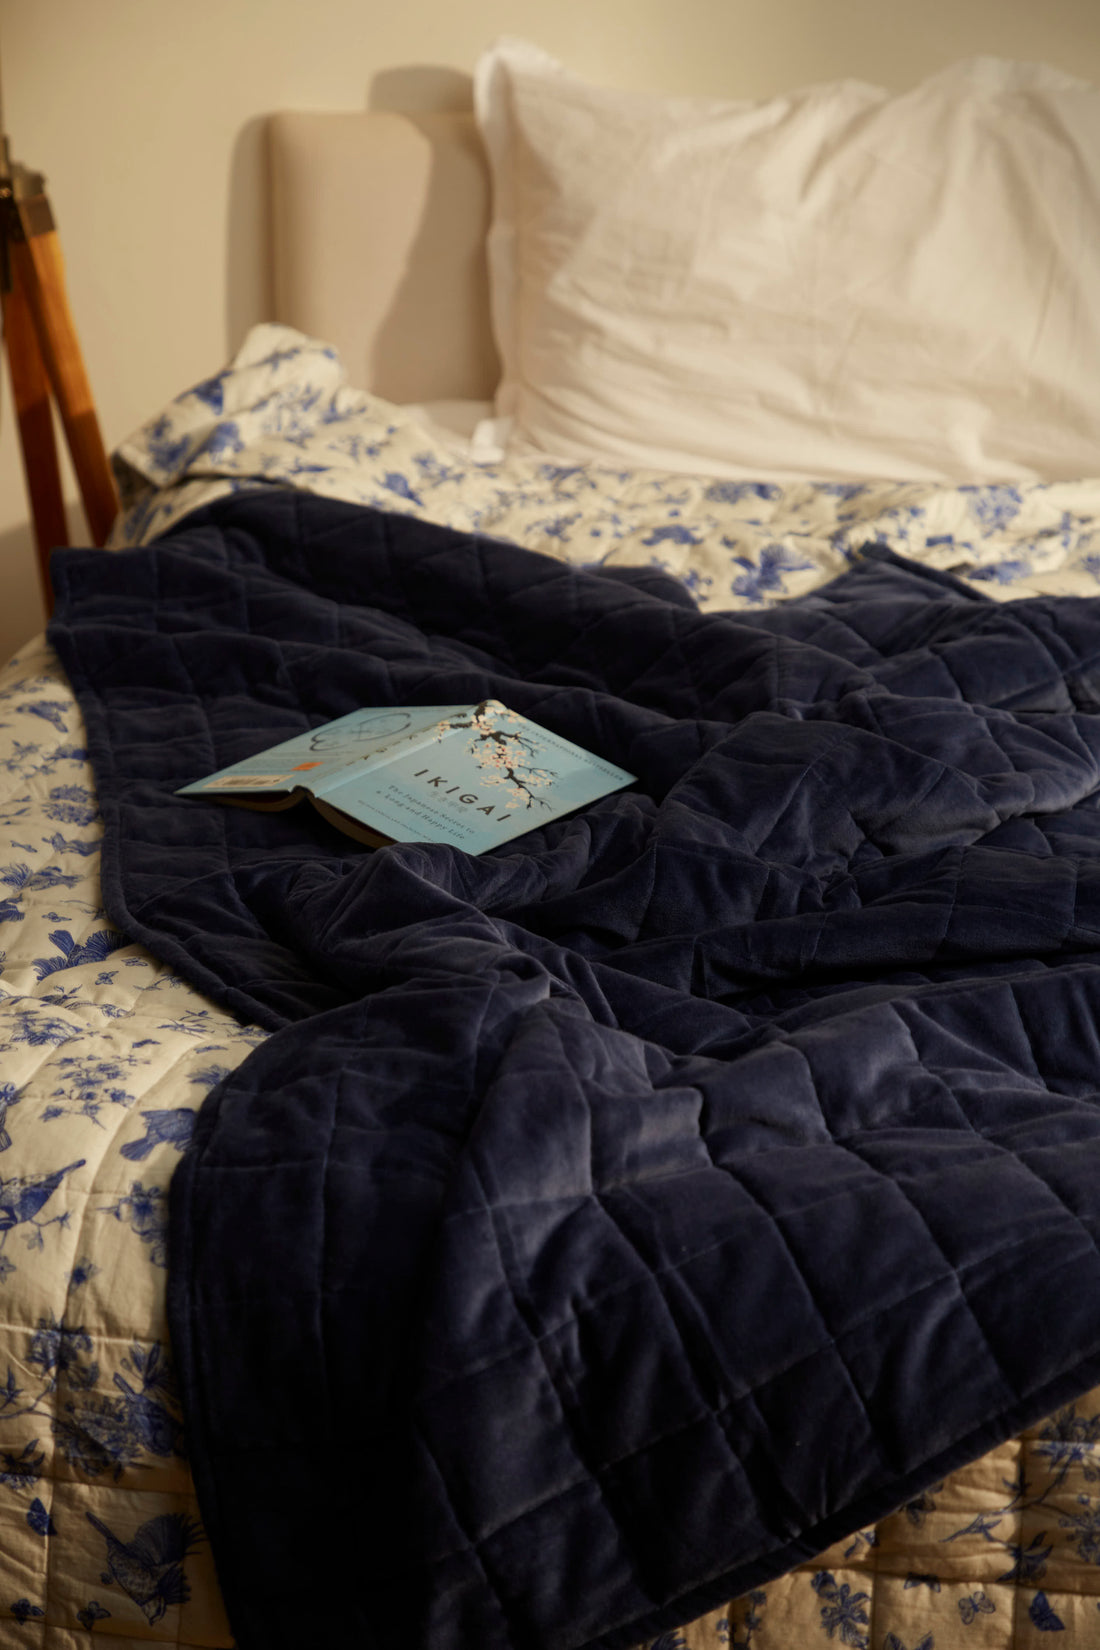 How to Wash and Care for your Weighted Blanket